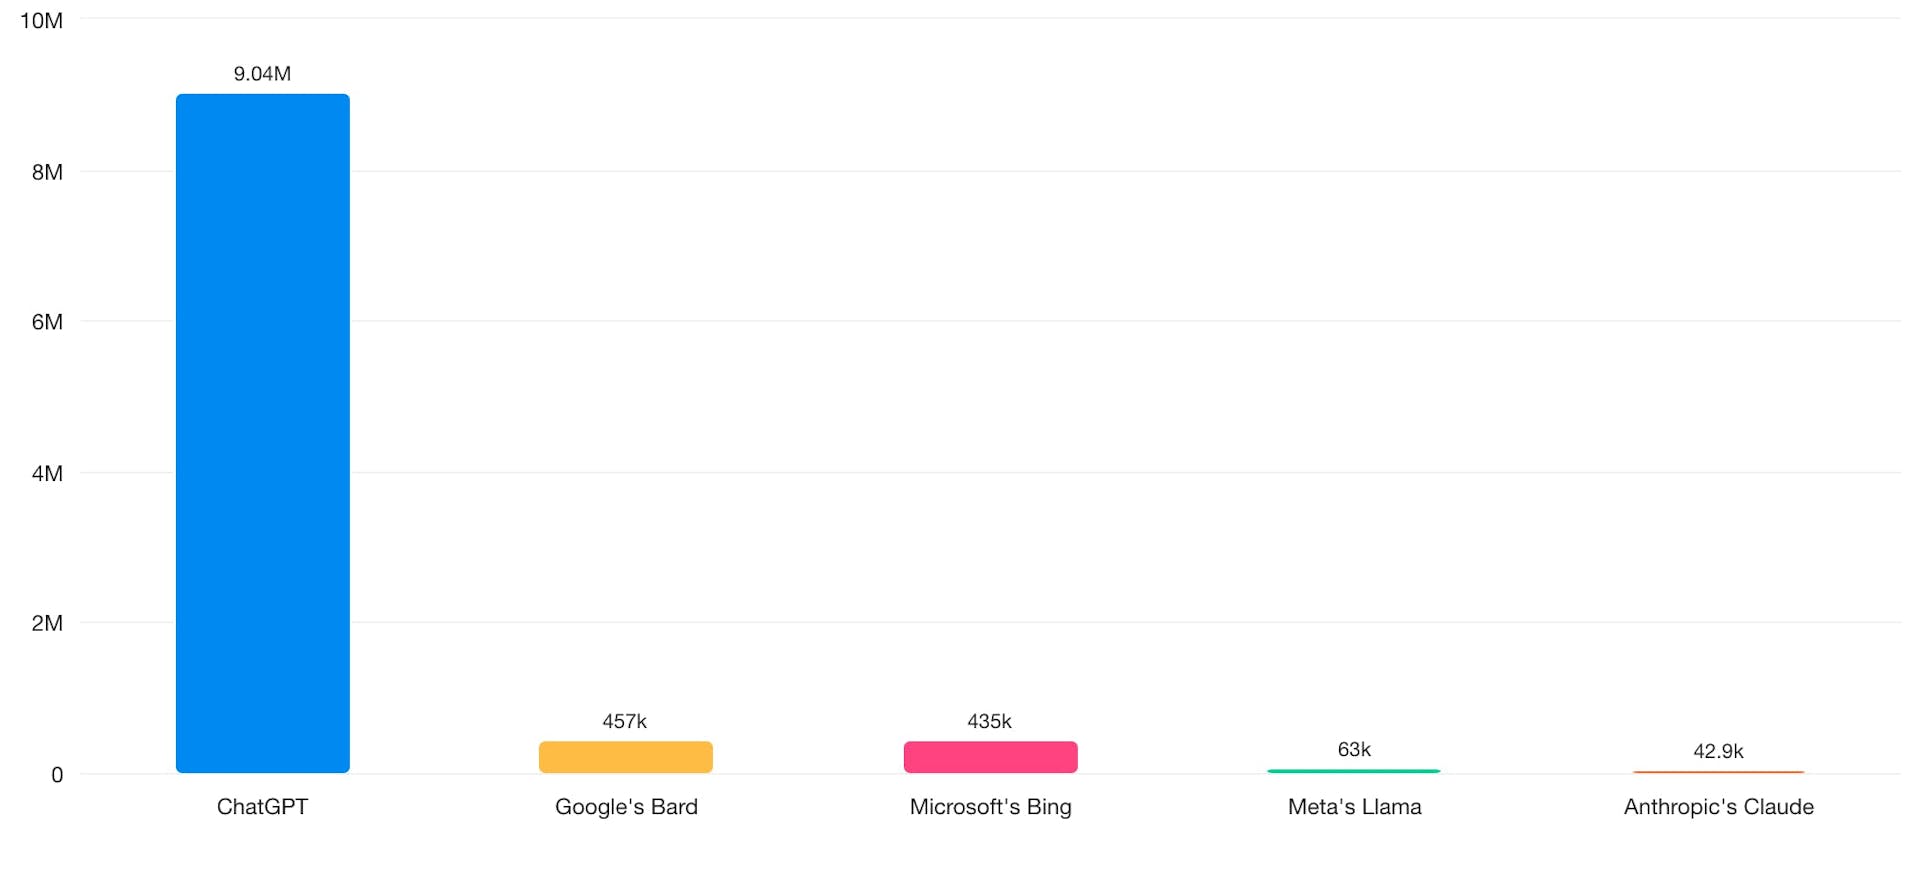 Bar graphs showing ChatGPT having about 9 million mentions compared to 457K mentions of Google's Bard, 435K mentions of Microsoft's Bing, 63K mentions of Meta's Llama, and 42.9K mentions of Anthropic's Claude.